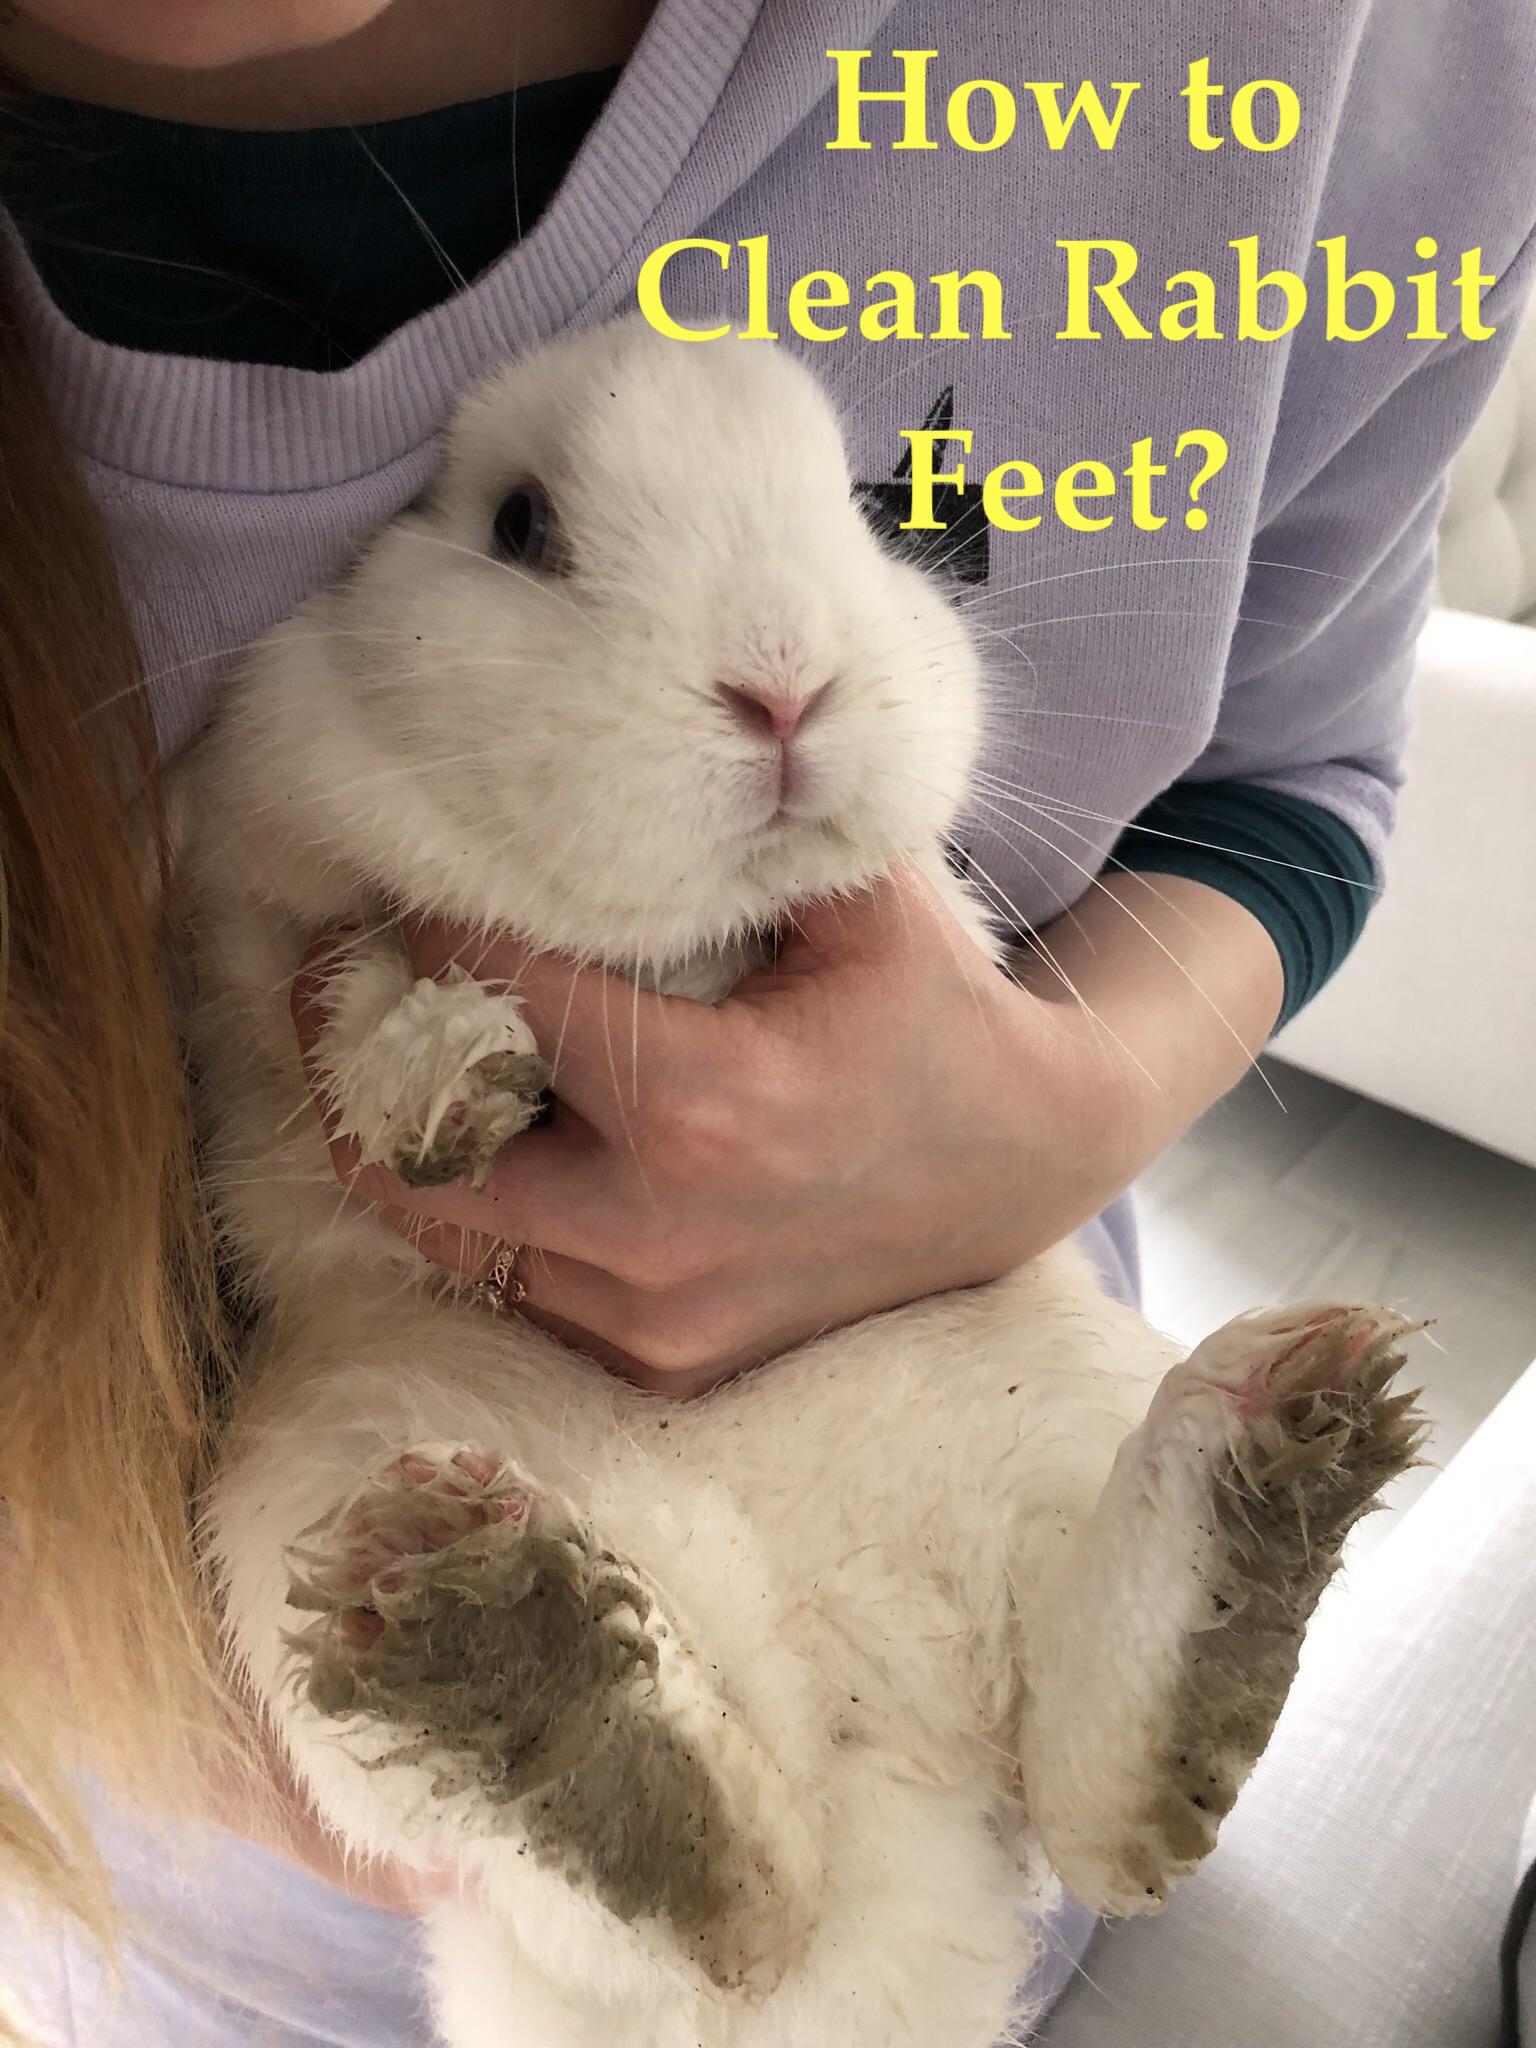 How to Clean Rabbits Feet?